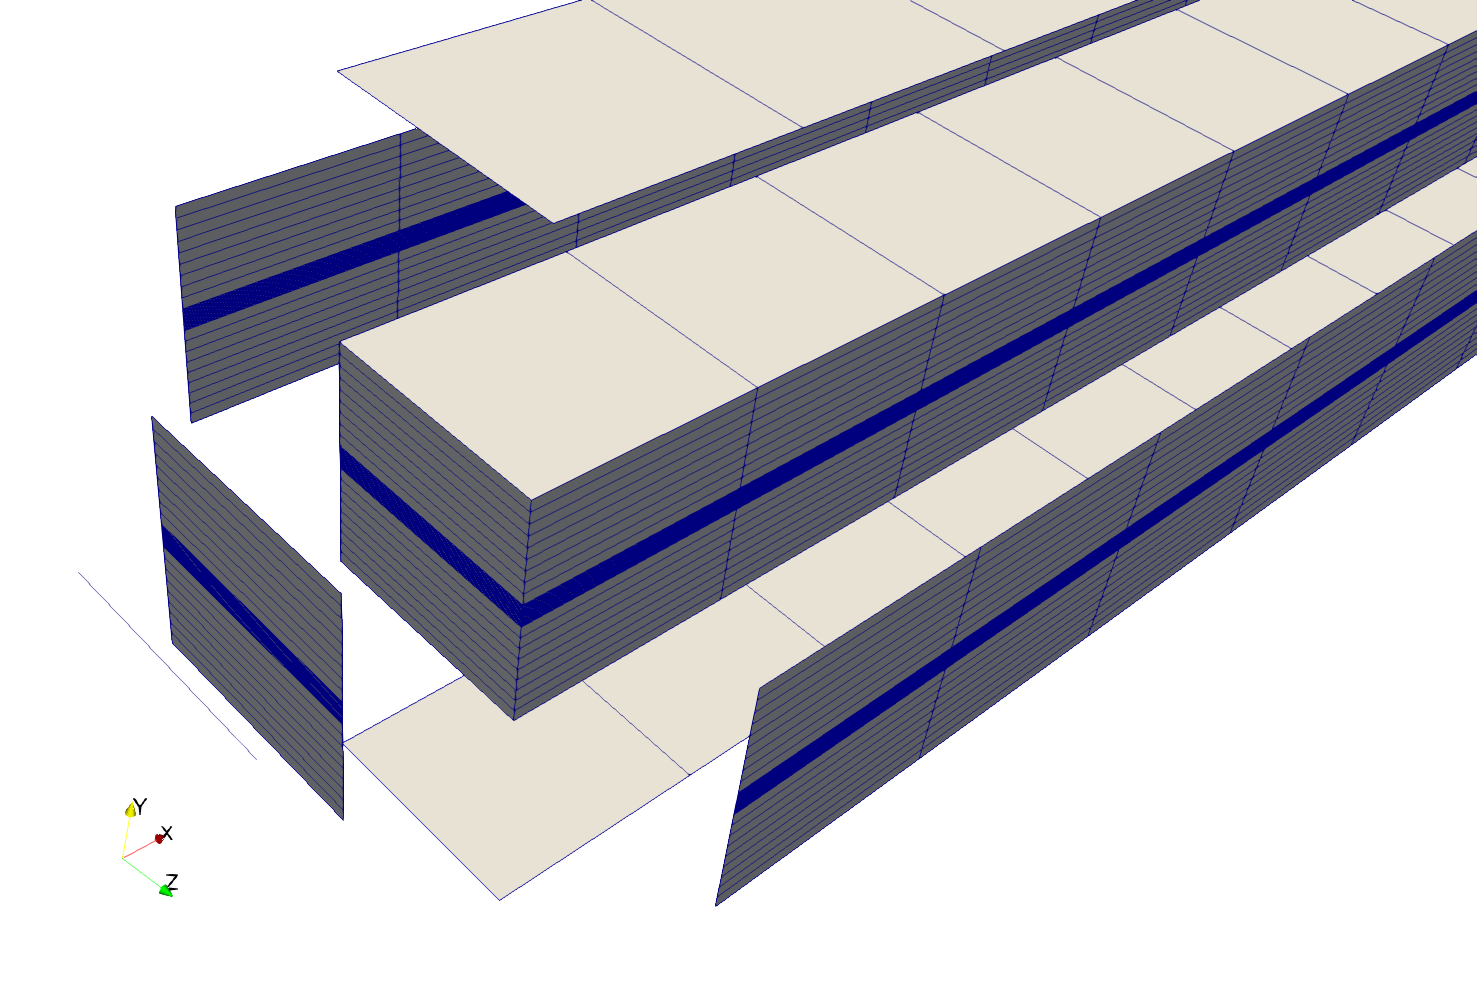 The front part of the mesh with the extracted geometries